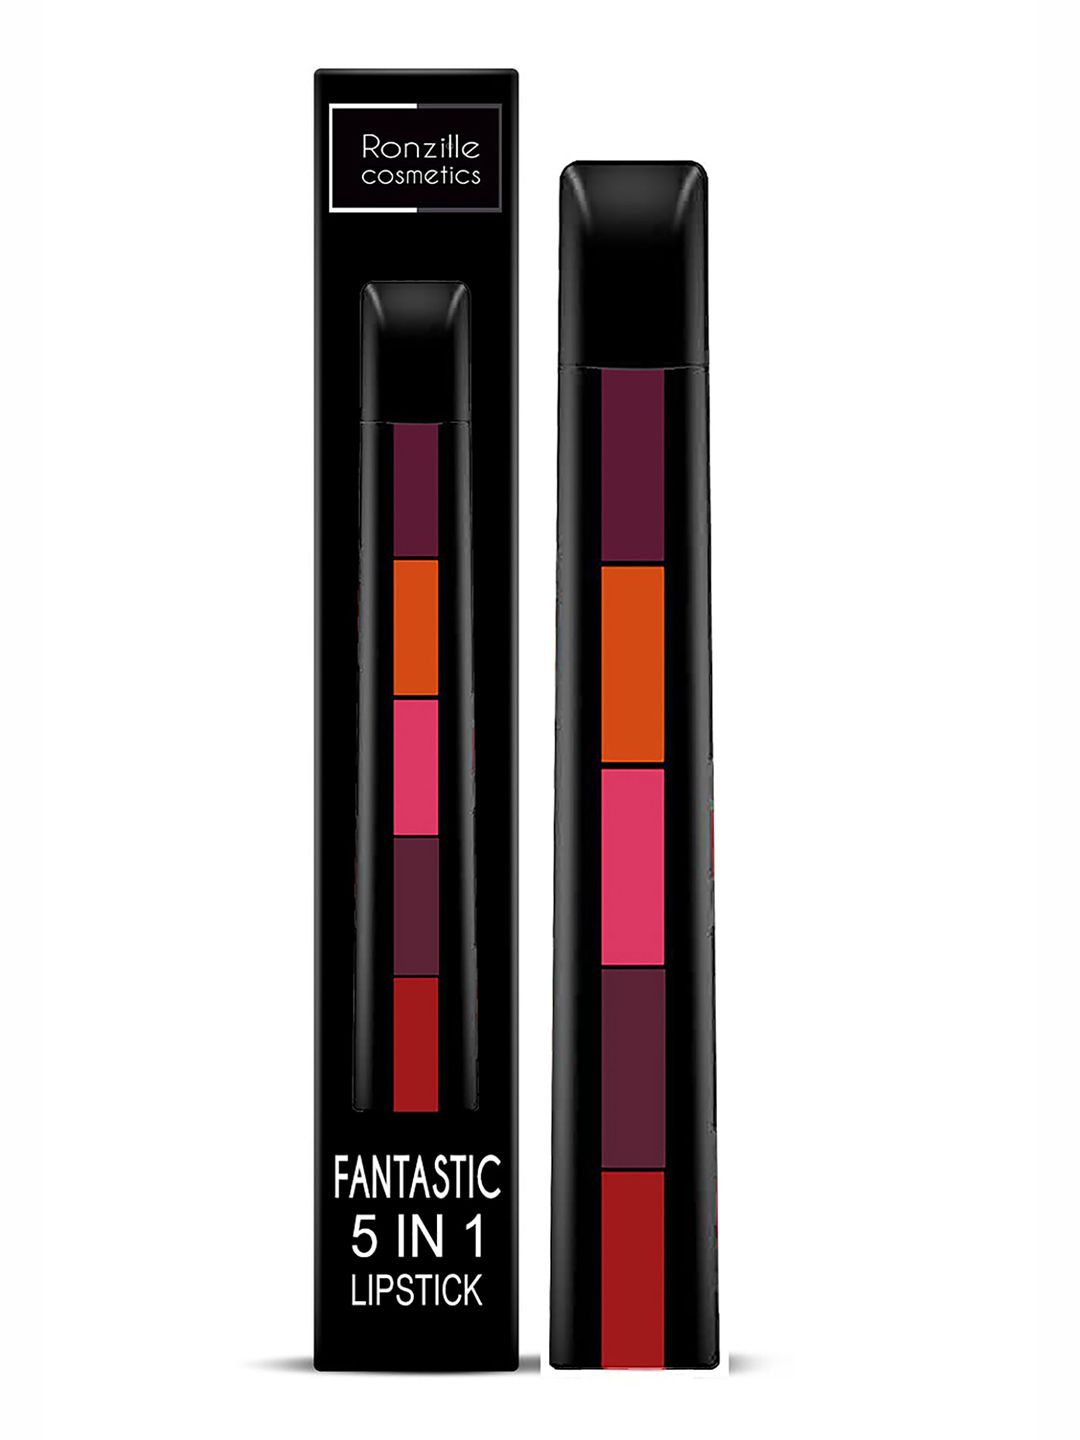 Ronzille Fantastic 5 in1 Lipstick Shade-C Price in India